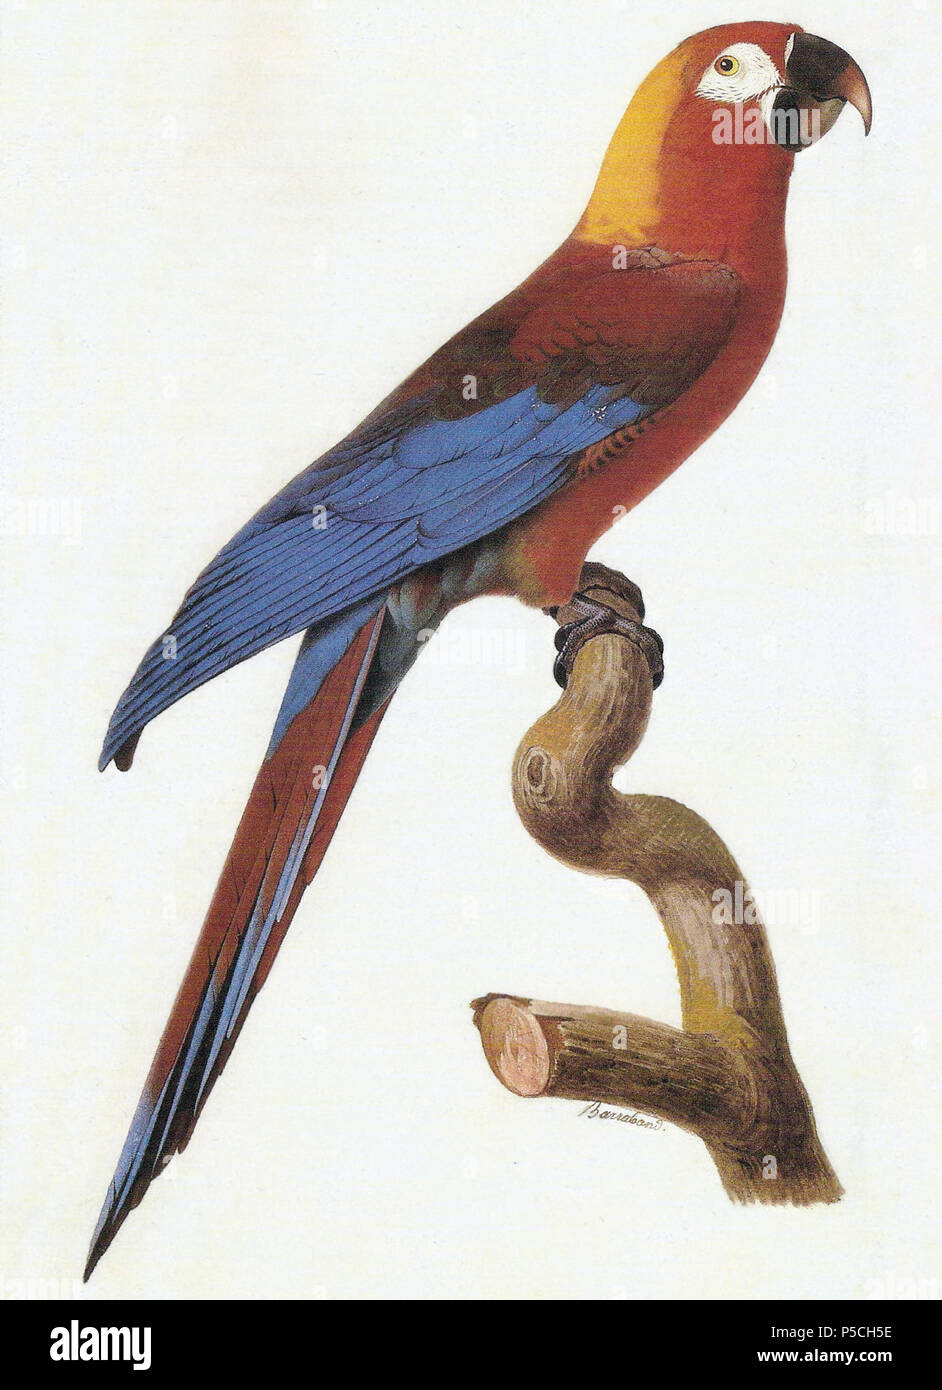 N/A. Watercolour by Jacques Barraband (circa 1800) of a Cuban Red Macaw (Ara tricolor). circa 1800.   Jacques Barraband  (1767–1809)     Alternative names Jacques Baraban; Baraband d'Aubusson; Jacques Barraban; M. Baraband; Baraban  Description French artist  Date of birth/death 31 August 1767 1 October 1809  Location of birth/death Aubusson, Creuse Lyon  Work location Egypt; Paris (1785–1807); Lyon (1807–1809)  Authority control  : Q3158196 VIAF:74094332 ISNI:0000 0001 1672 6664 ULAN:500011412 LCCN:n85819567 NLA:35773957 WorldCat 50 A. tricolor Stock Photo